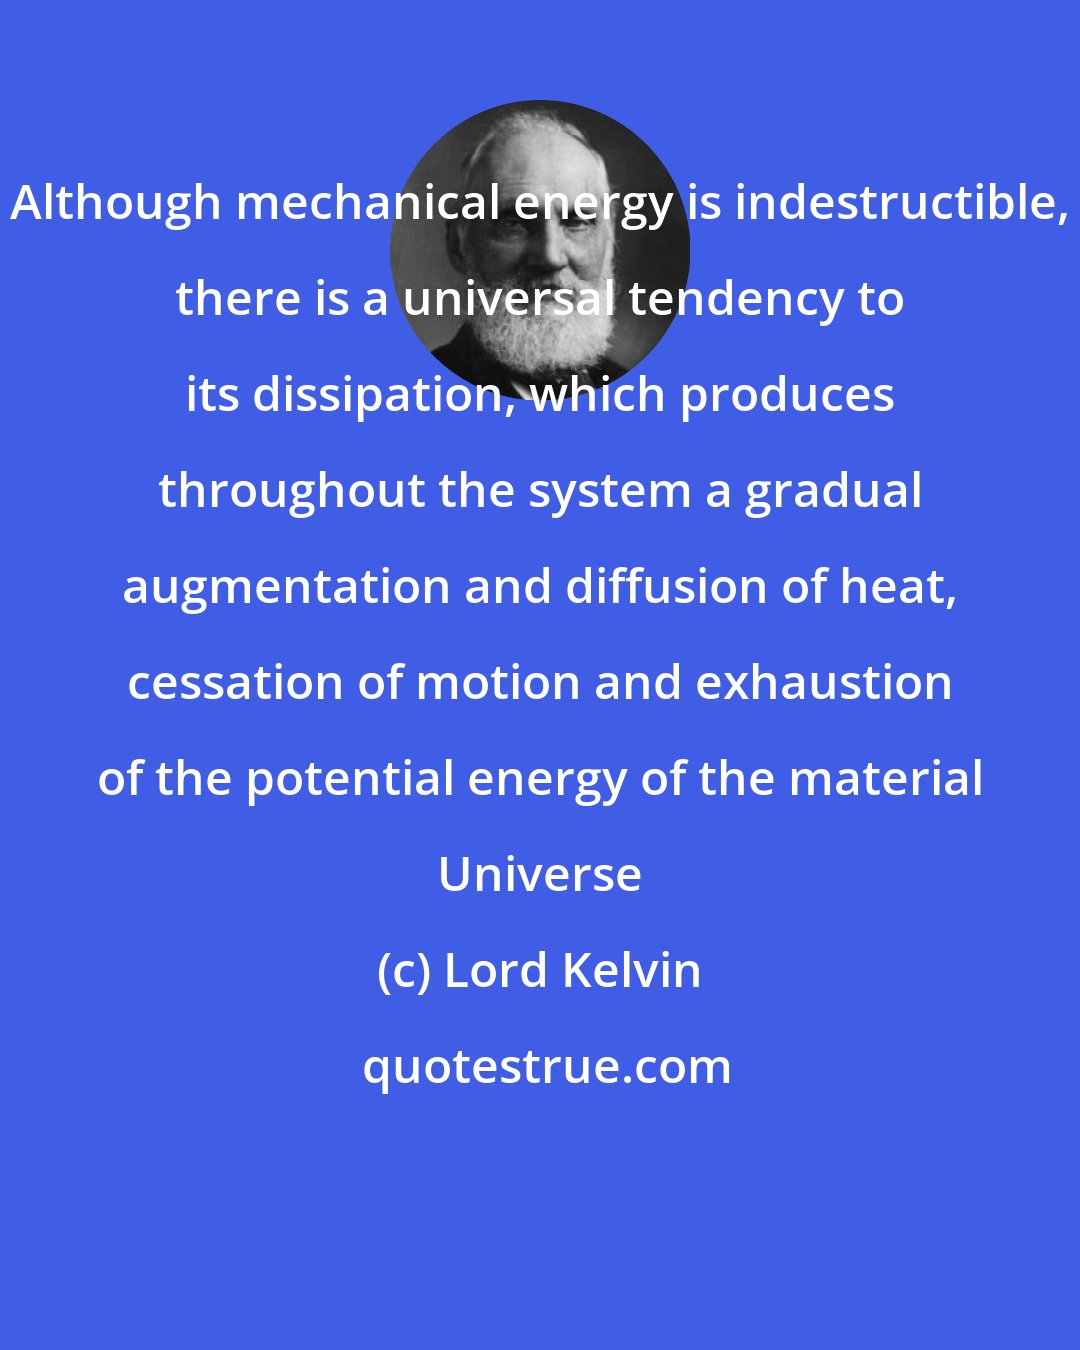 Lord Kelvin: Although mechanical energy is indestructible, there is a universal tendency to its dissipation, which produces throughout the system a gradual augmentation and diffusion of heat, cessation of motion and exhaustion of the potential energy of the material Universe